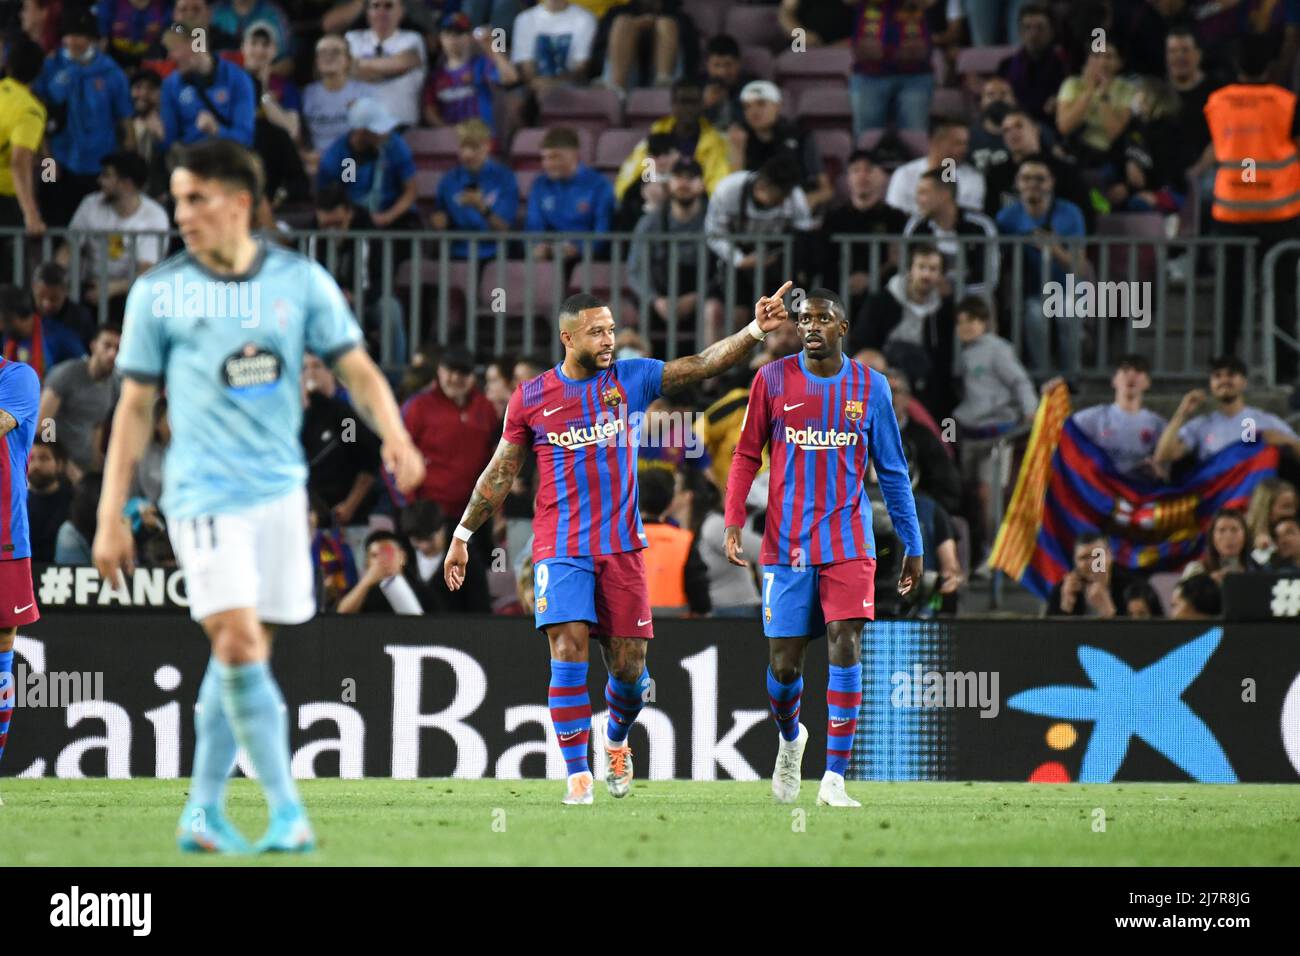 BARCELONA, SPAIN - MAY 10: Memphis Depay of FC Barcelona celebrates after scoring a goal during La Liga match between FC Barcelona and RC Celta de Vigo at Camp Nou on May 10, 2022 in Barcelona, SPAIN. (Photo by Sara Aribo/PxImages) Stock Photo